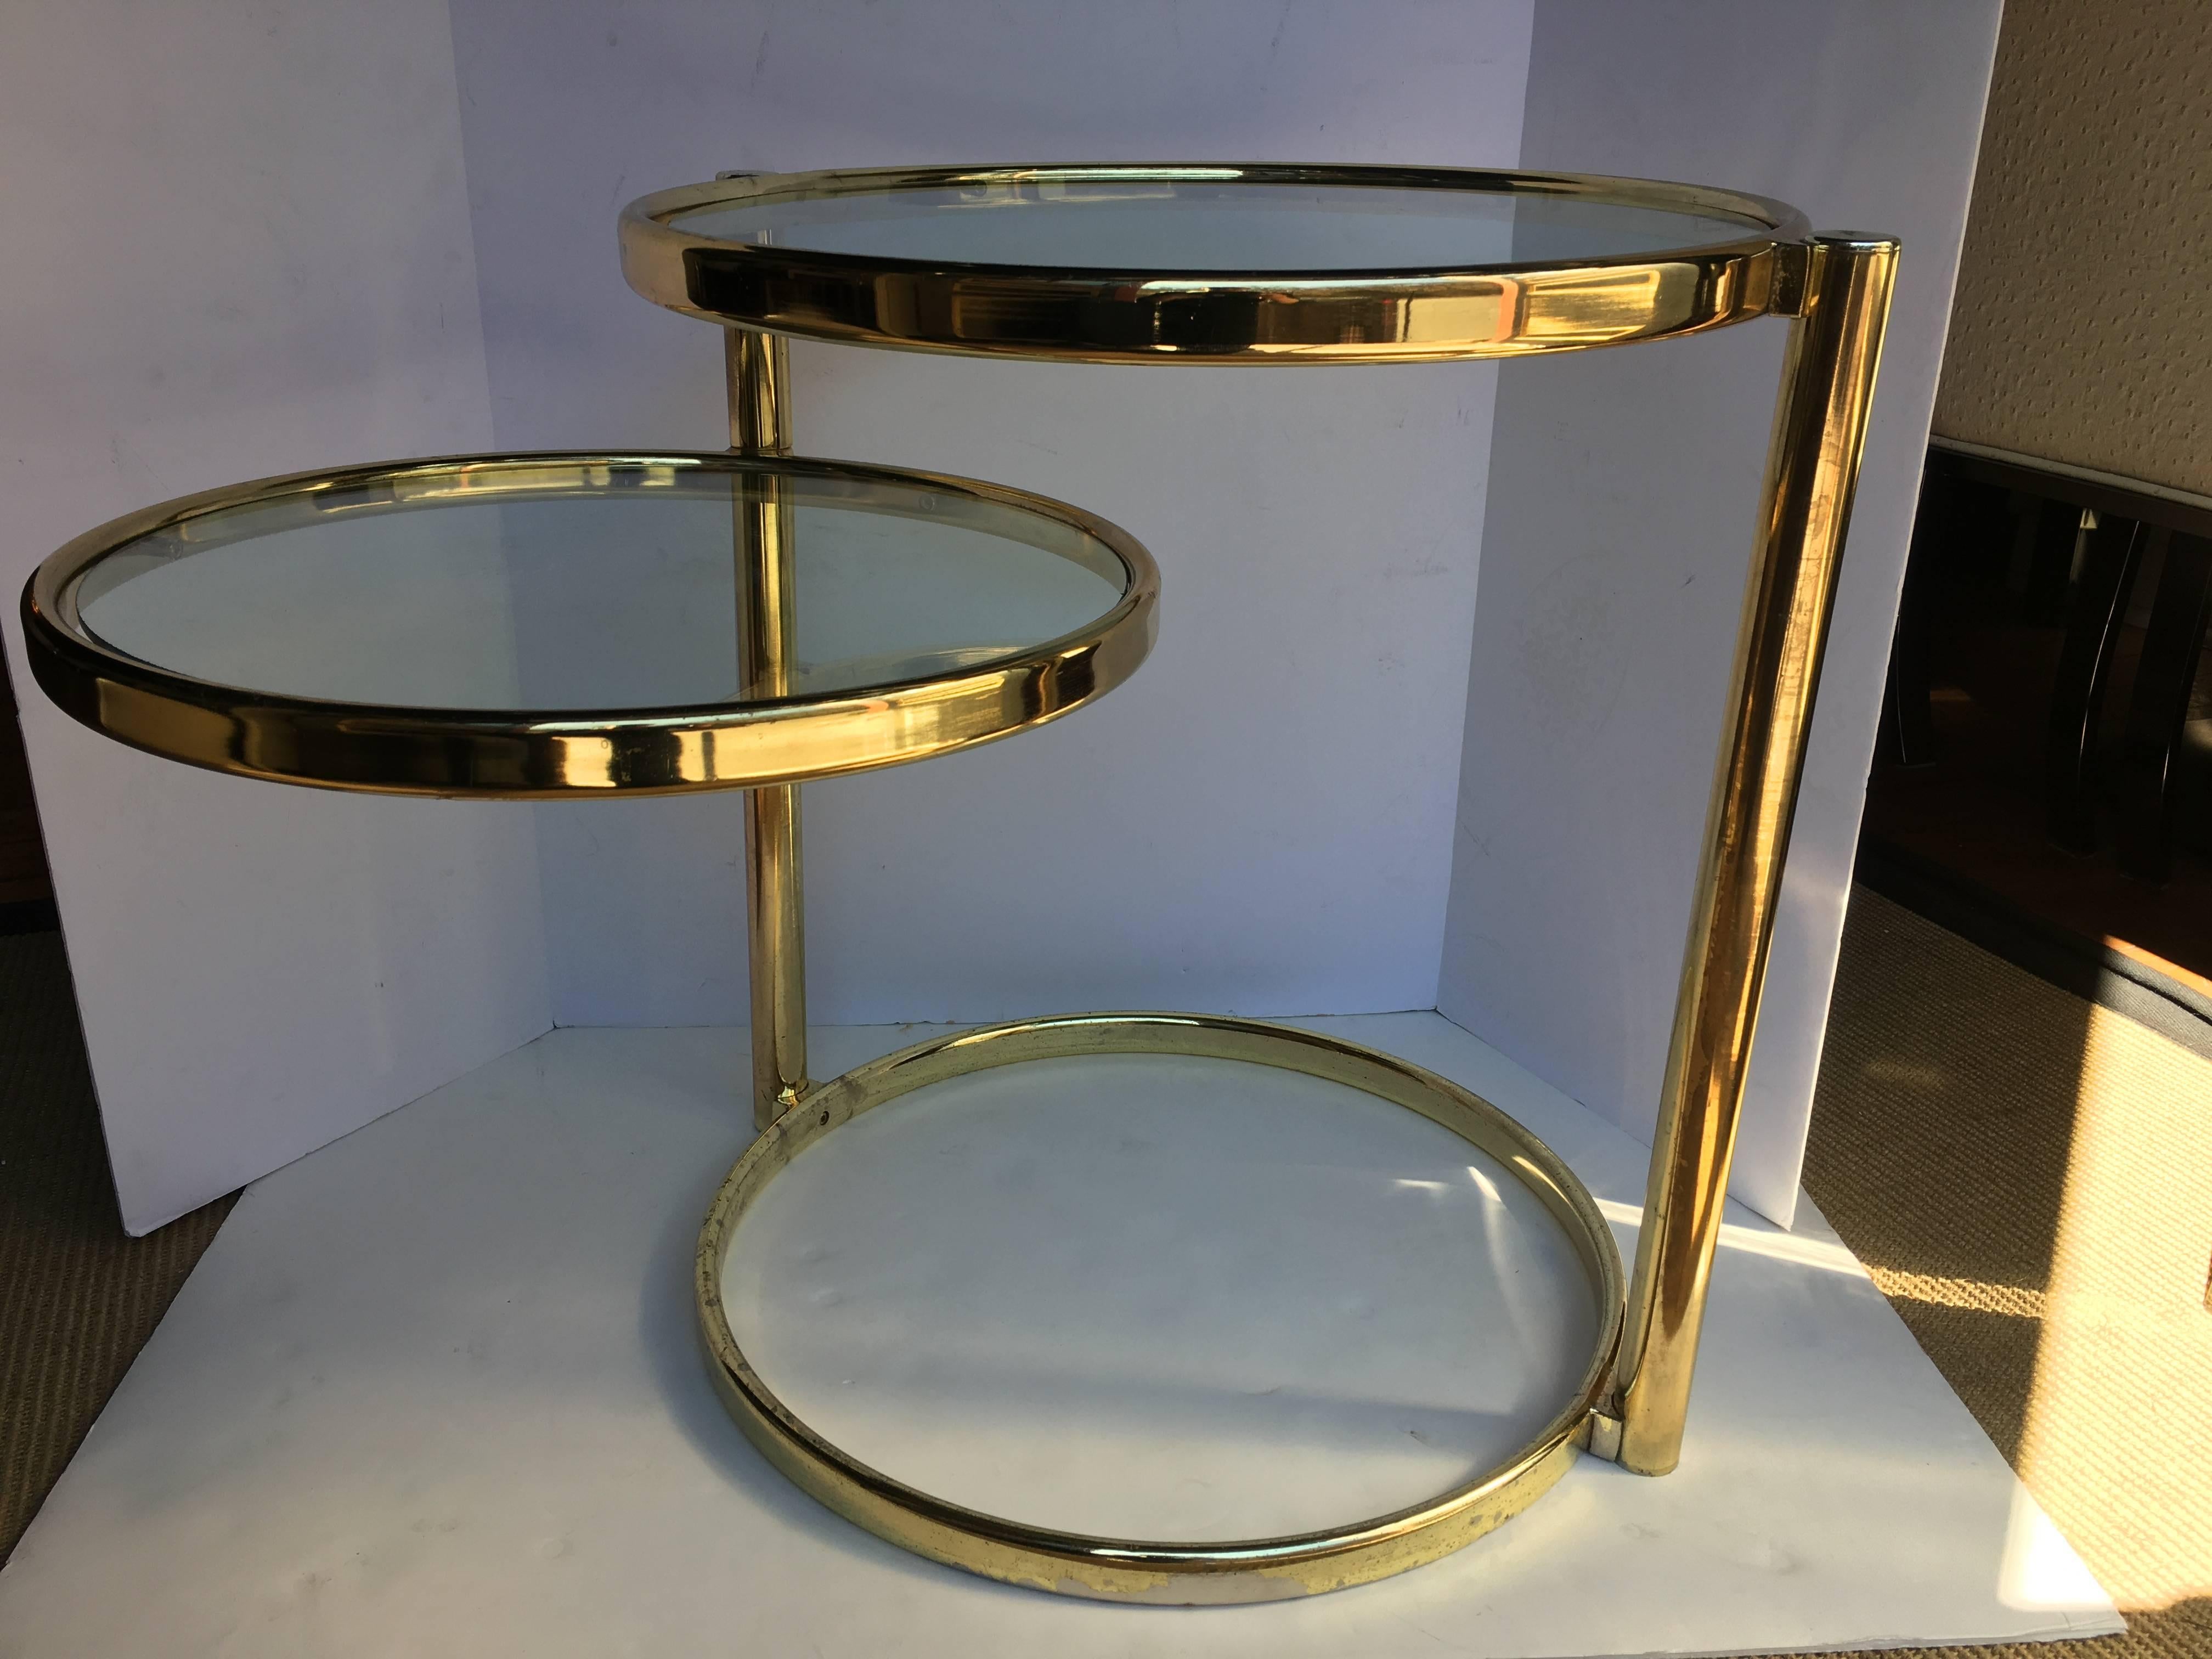 Mid-Century Modern two-tier articulating swivel brass accent or side table. 
Tubular brass plated frame features two removable round clear glass inserts. Top tier is stationary while the second round tier can swivel to desired position. 
Table can